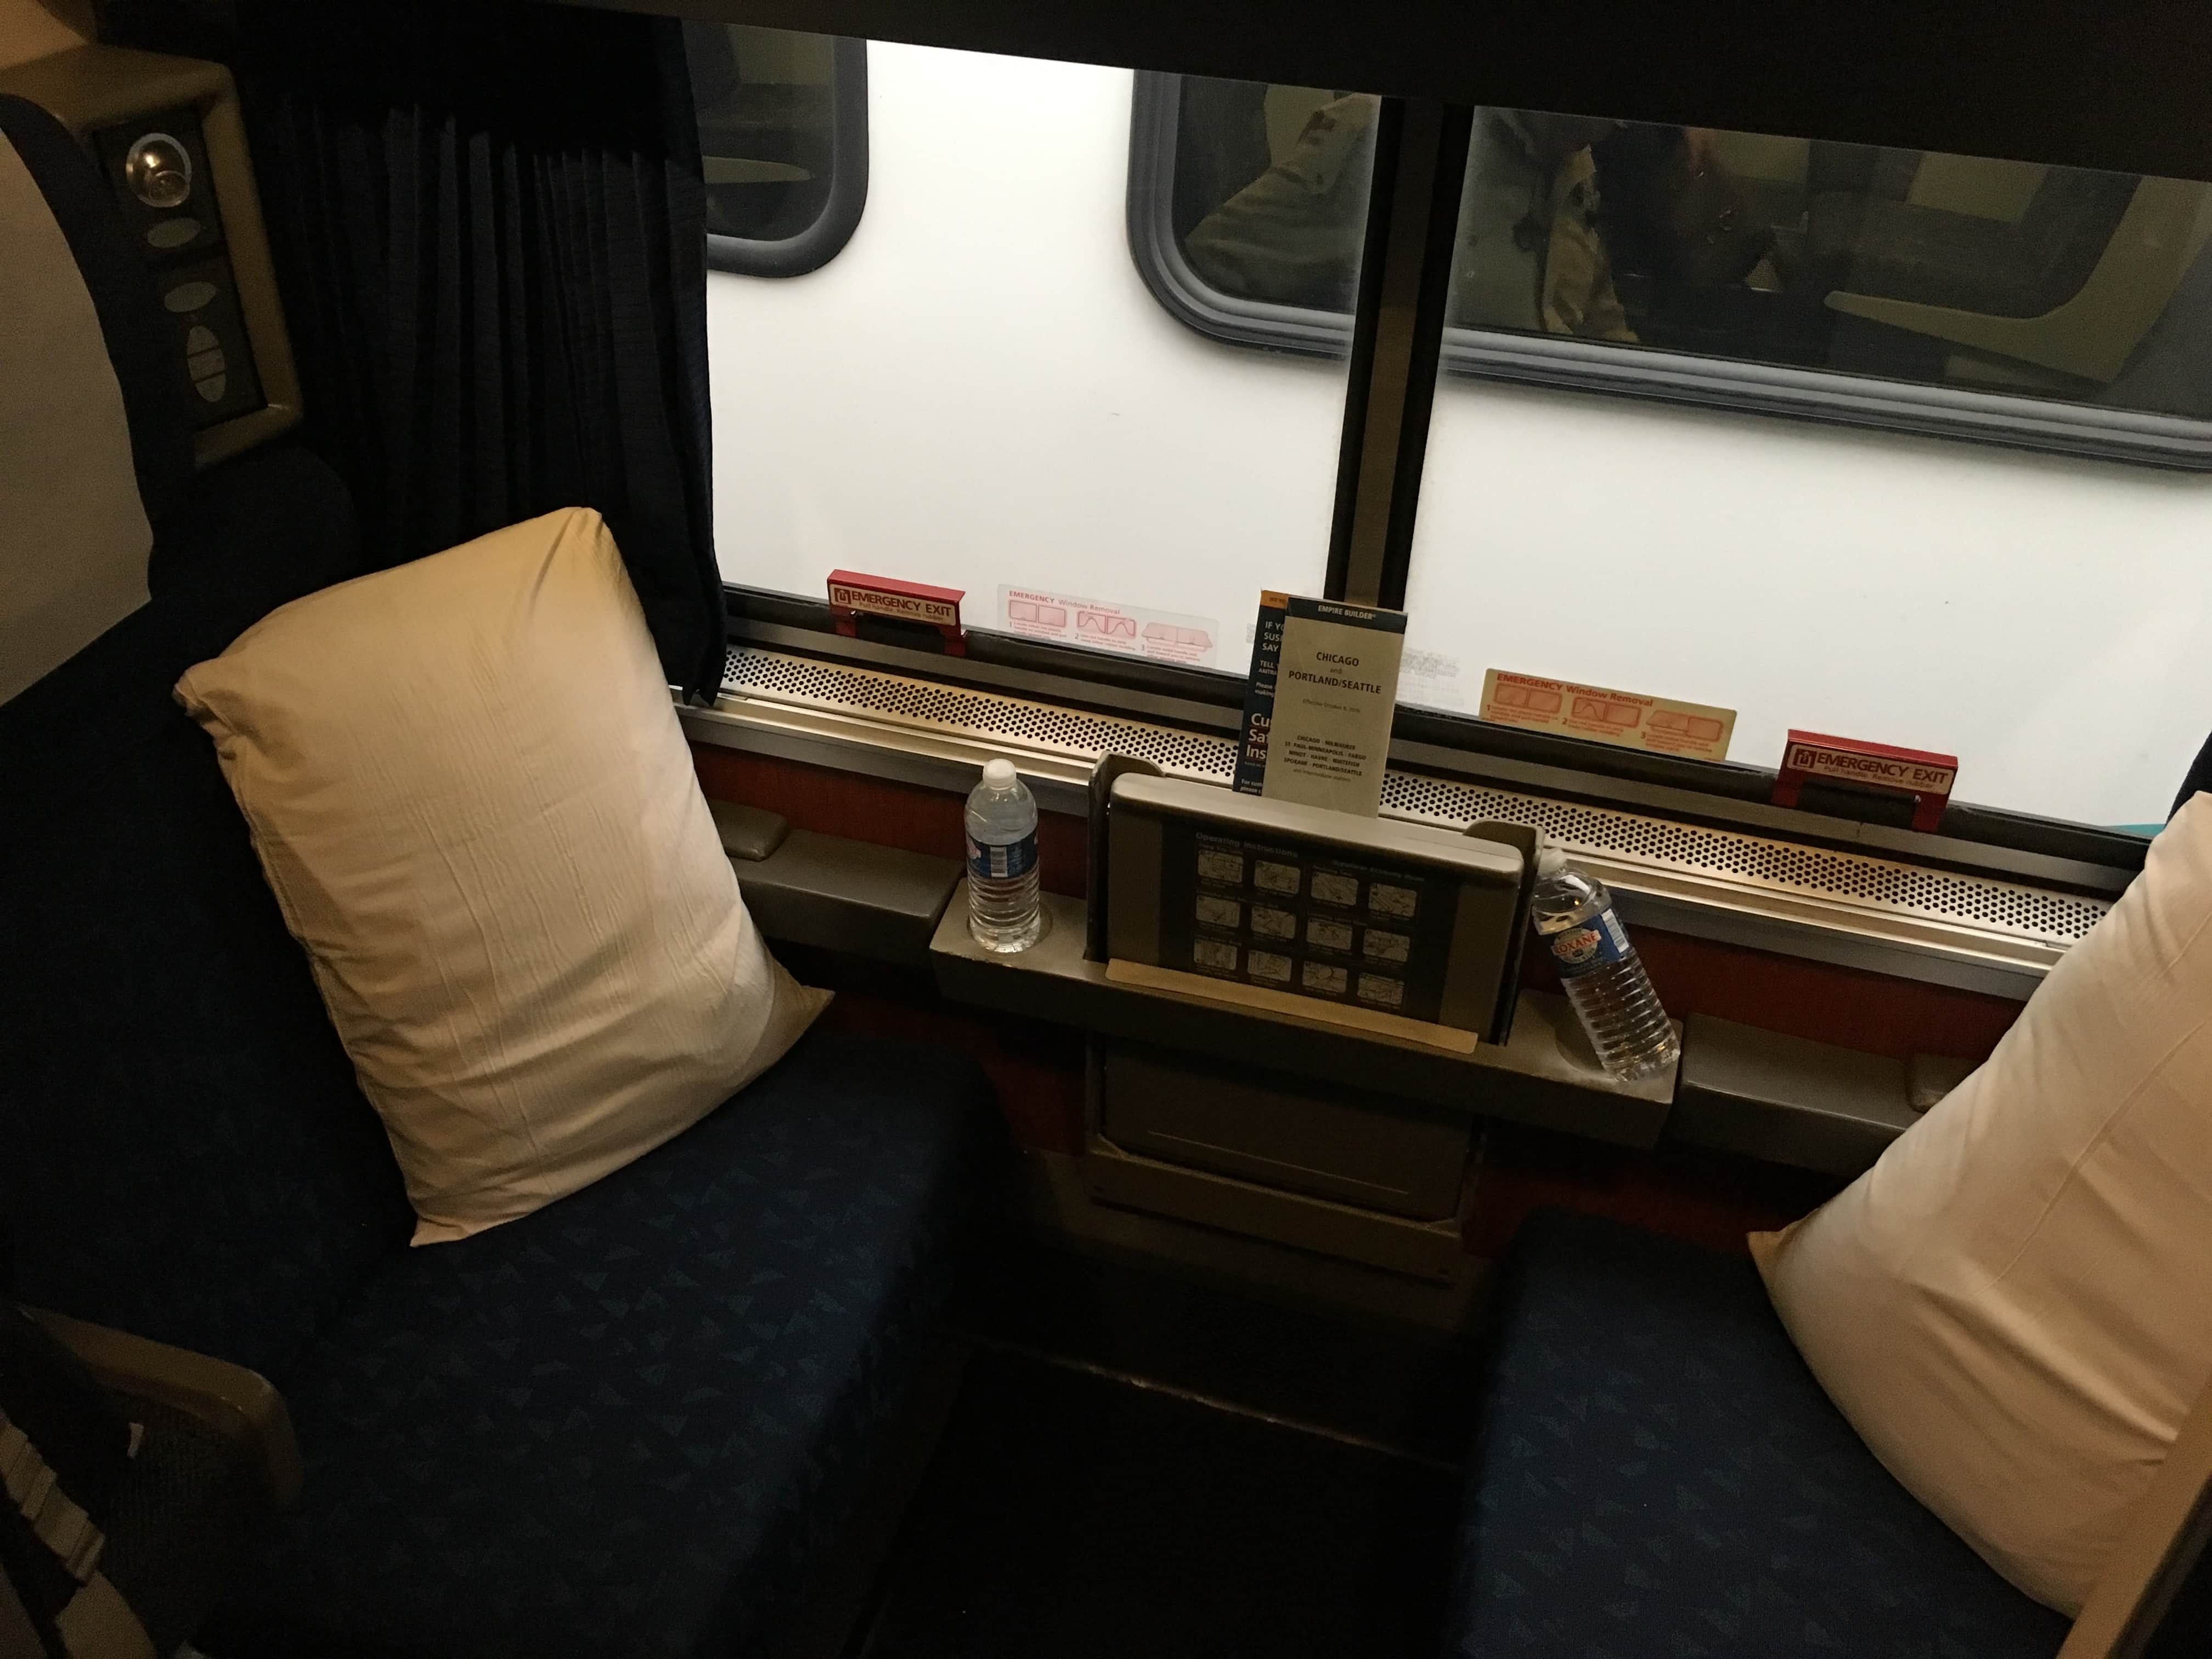 Our cabin on the Amtrak Empire Builder from Seattle to Chicago